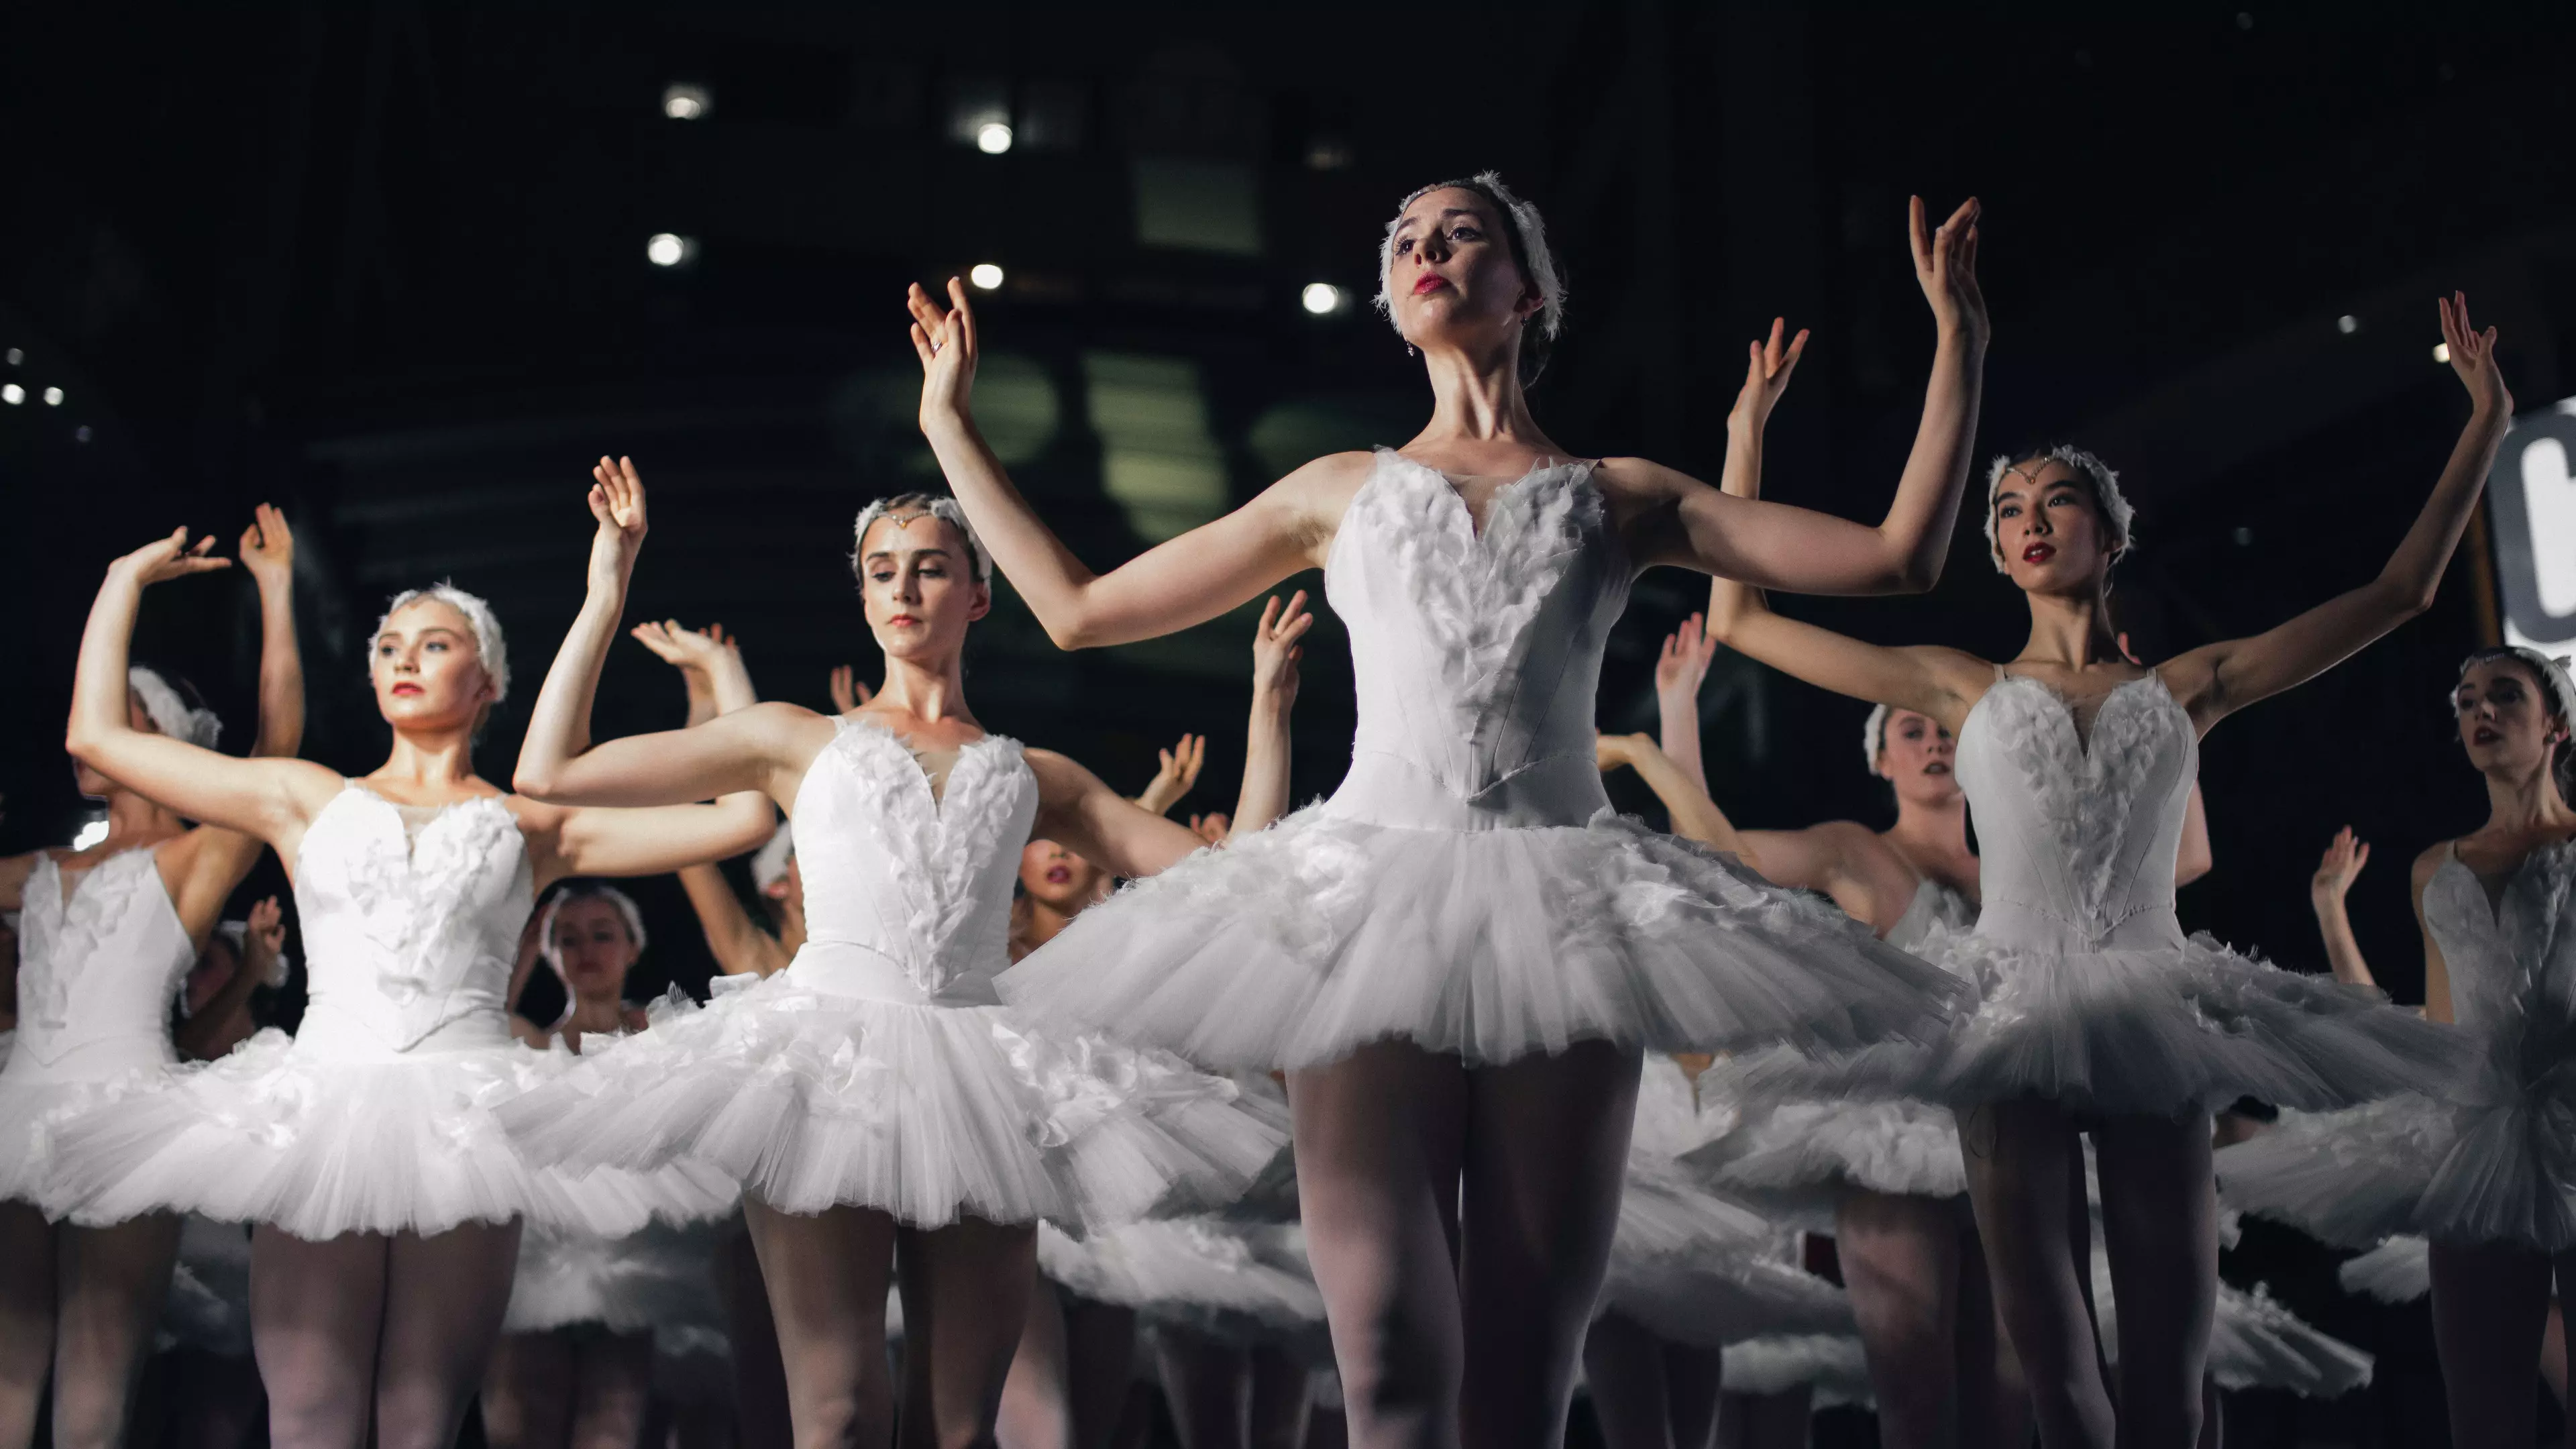 Government Ad Sparks Backlash For Telling Ballerina To Retrain In Cyber Security